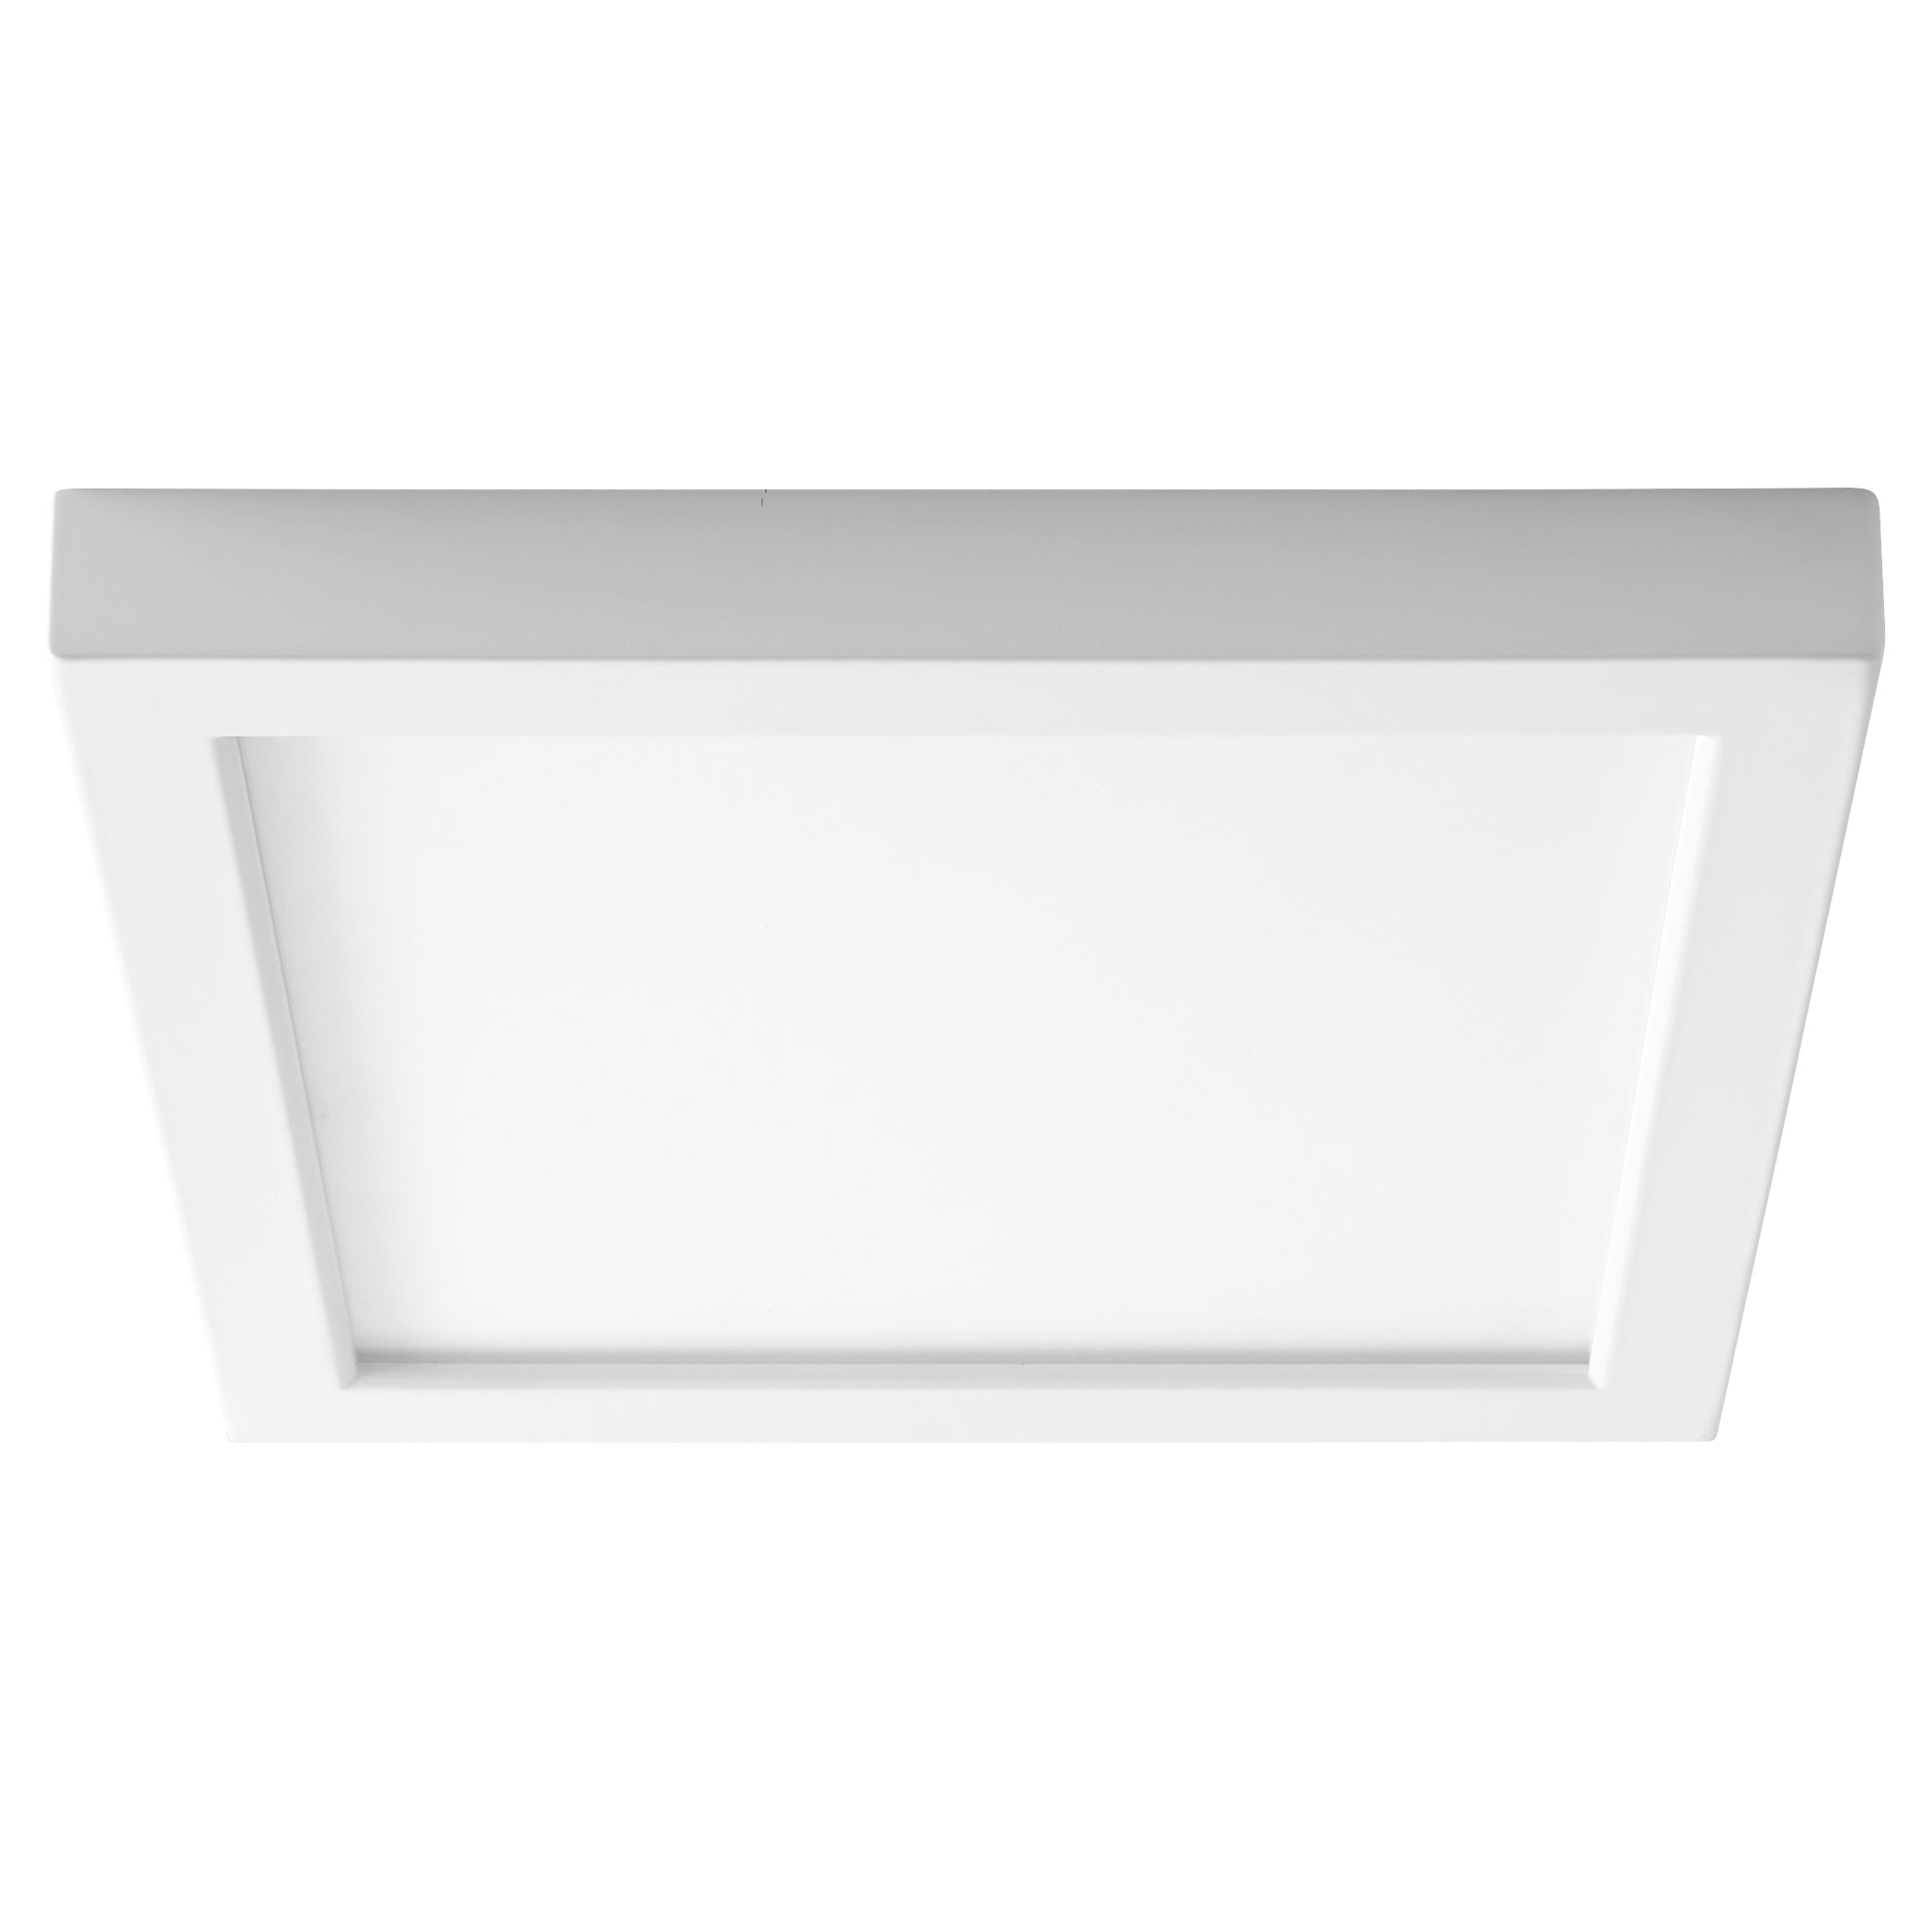 Oxygen Altair 3-334-6 Ceiling Mount - White